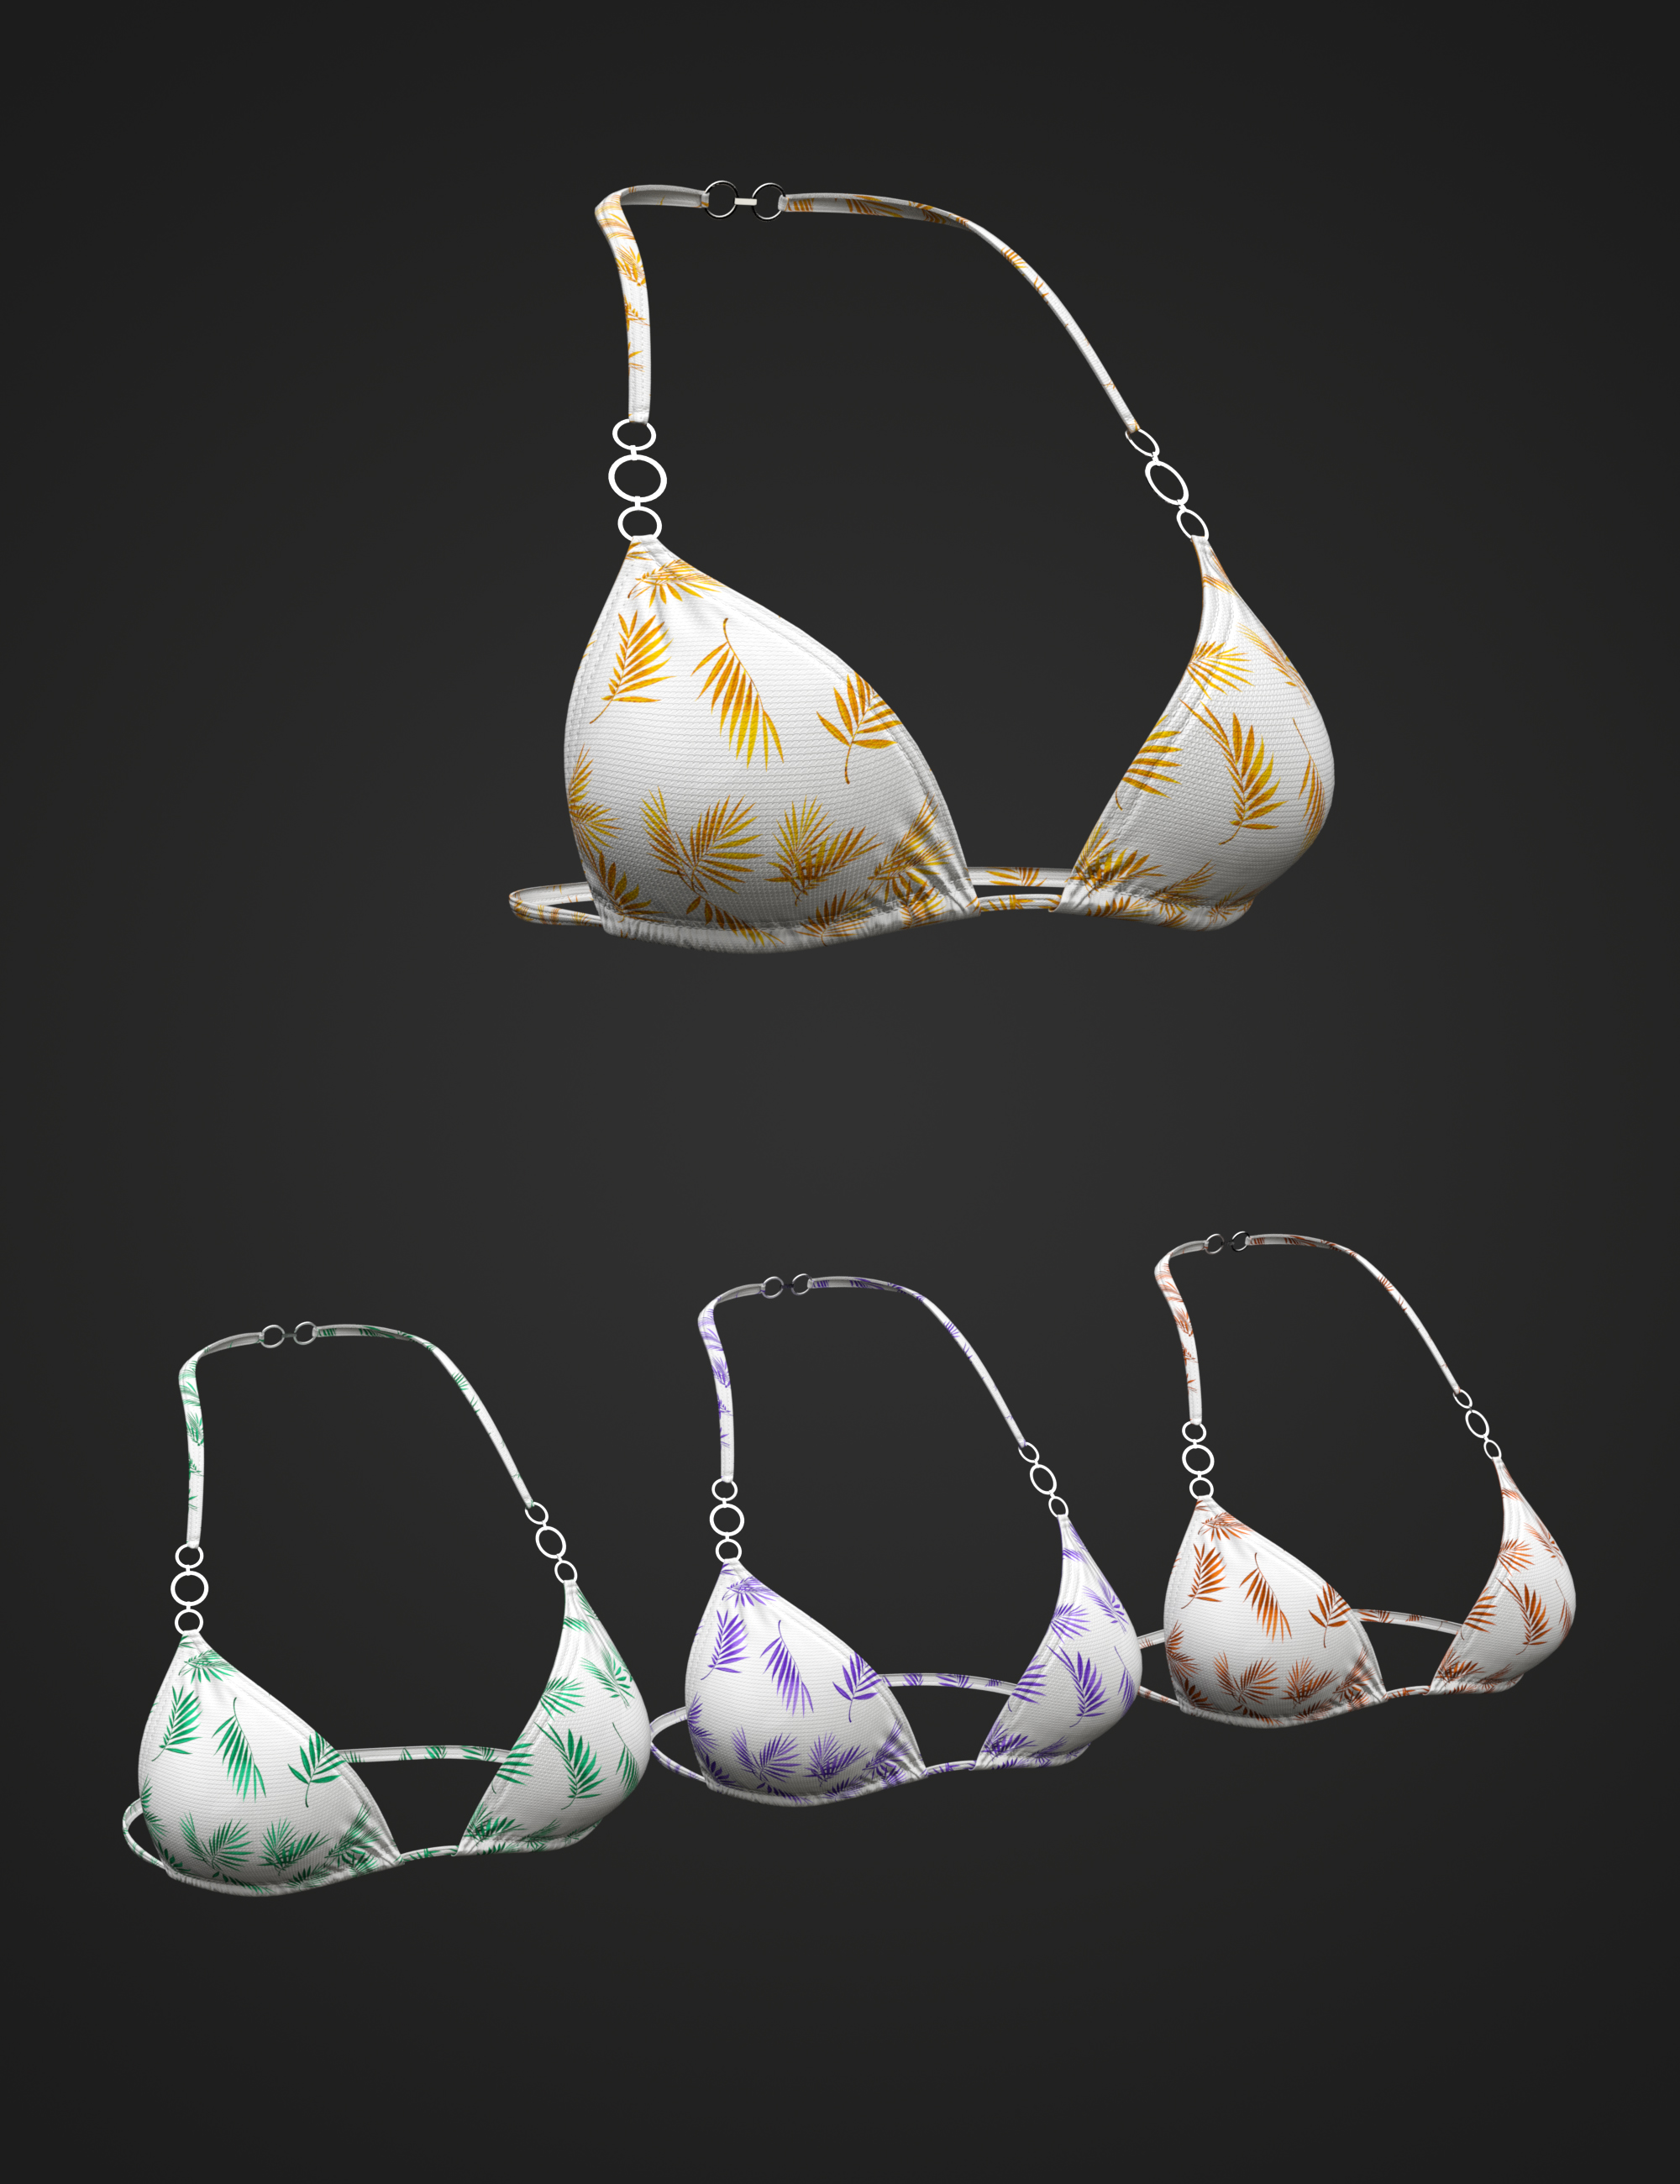 X Fashion Rings Bikini Top for Genesis 8 and 8.1 Females by: xtrart-3d, 3D Models by Daz 3D